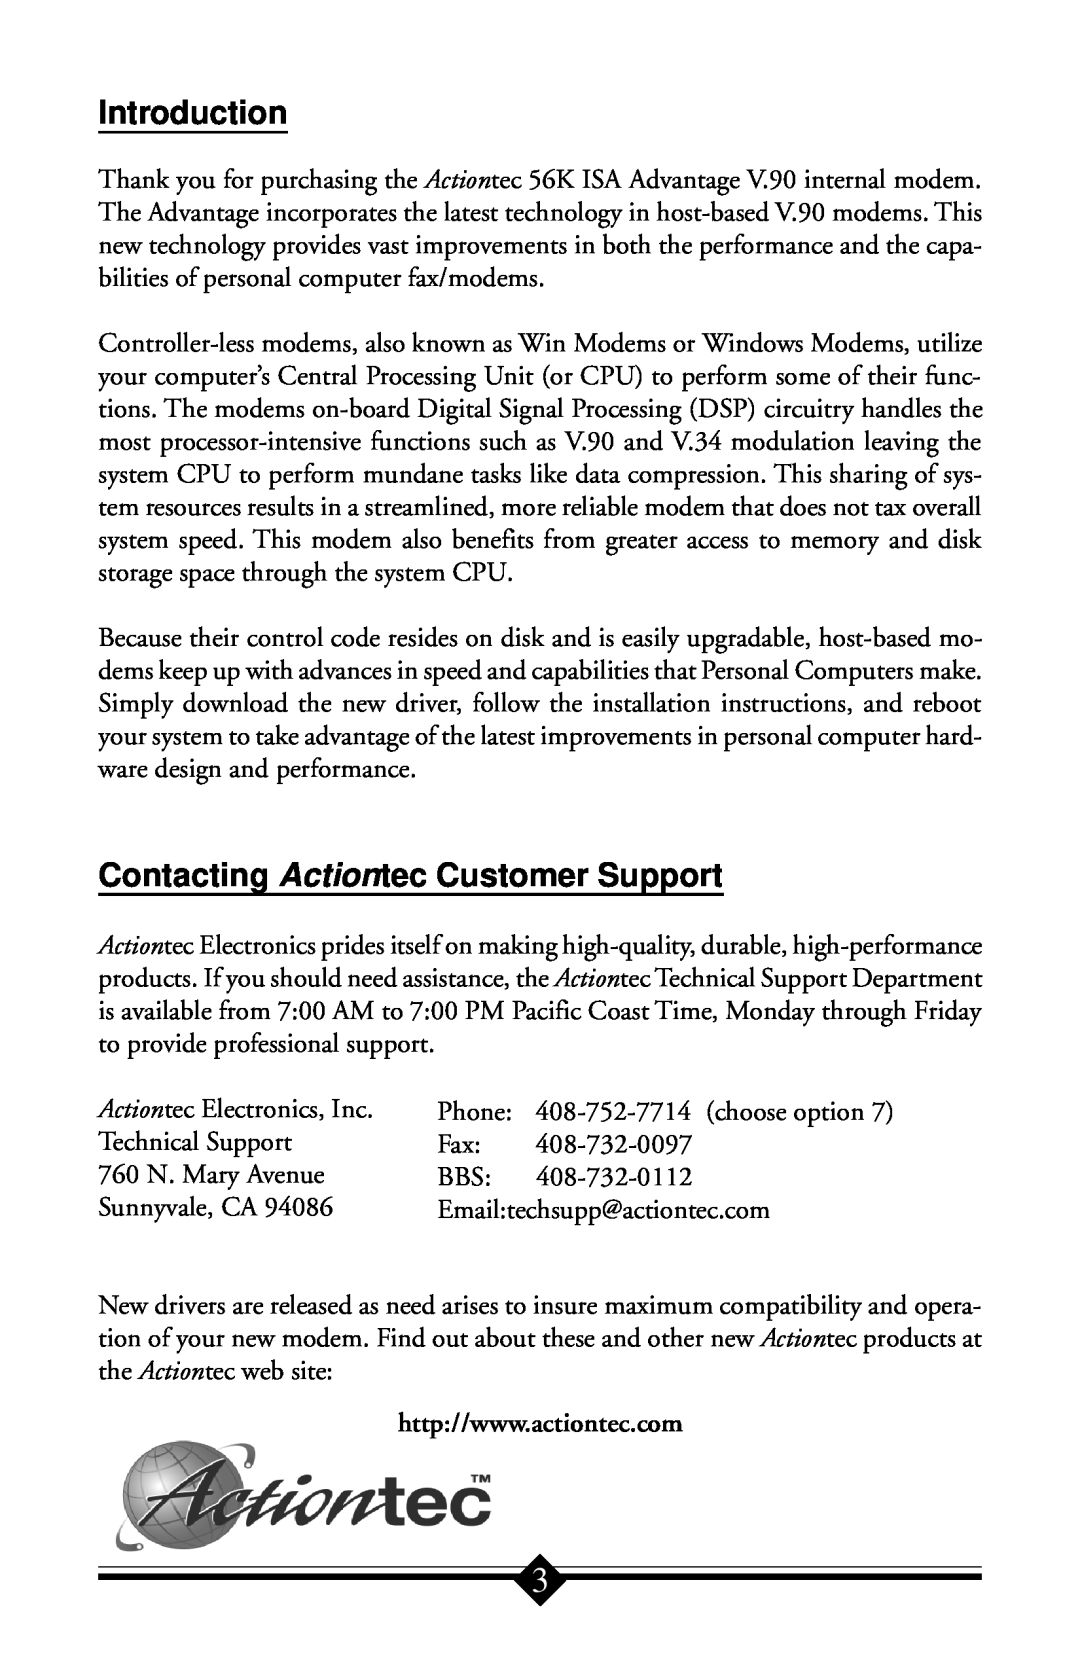 Actiontec electronic IS560LH Introduction, Contacting Actiontec Customer Support, Actiontec Electronics, Inc, Phone 